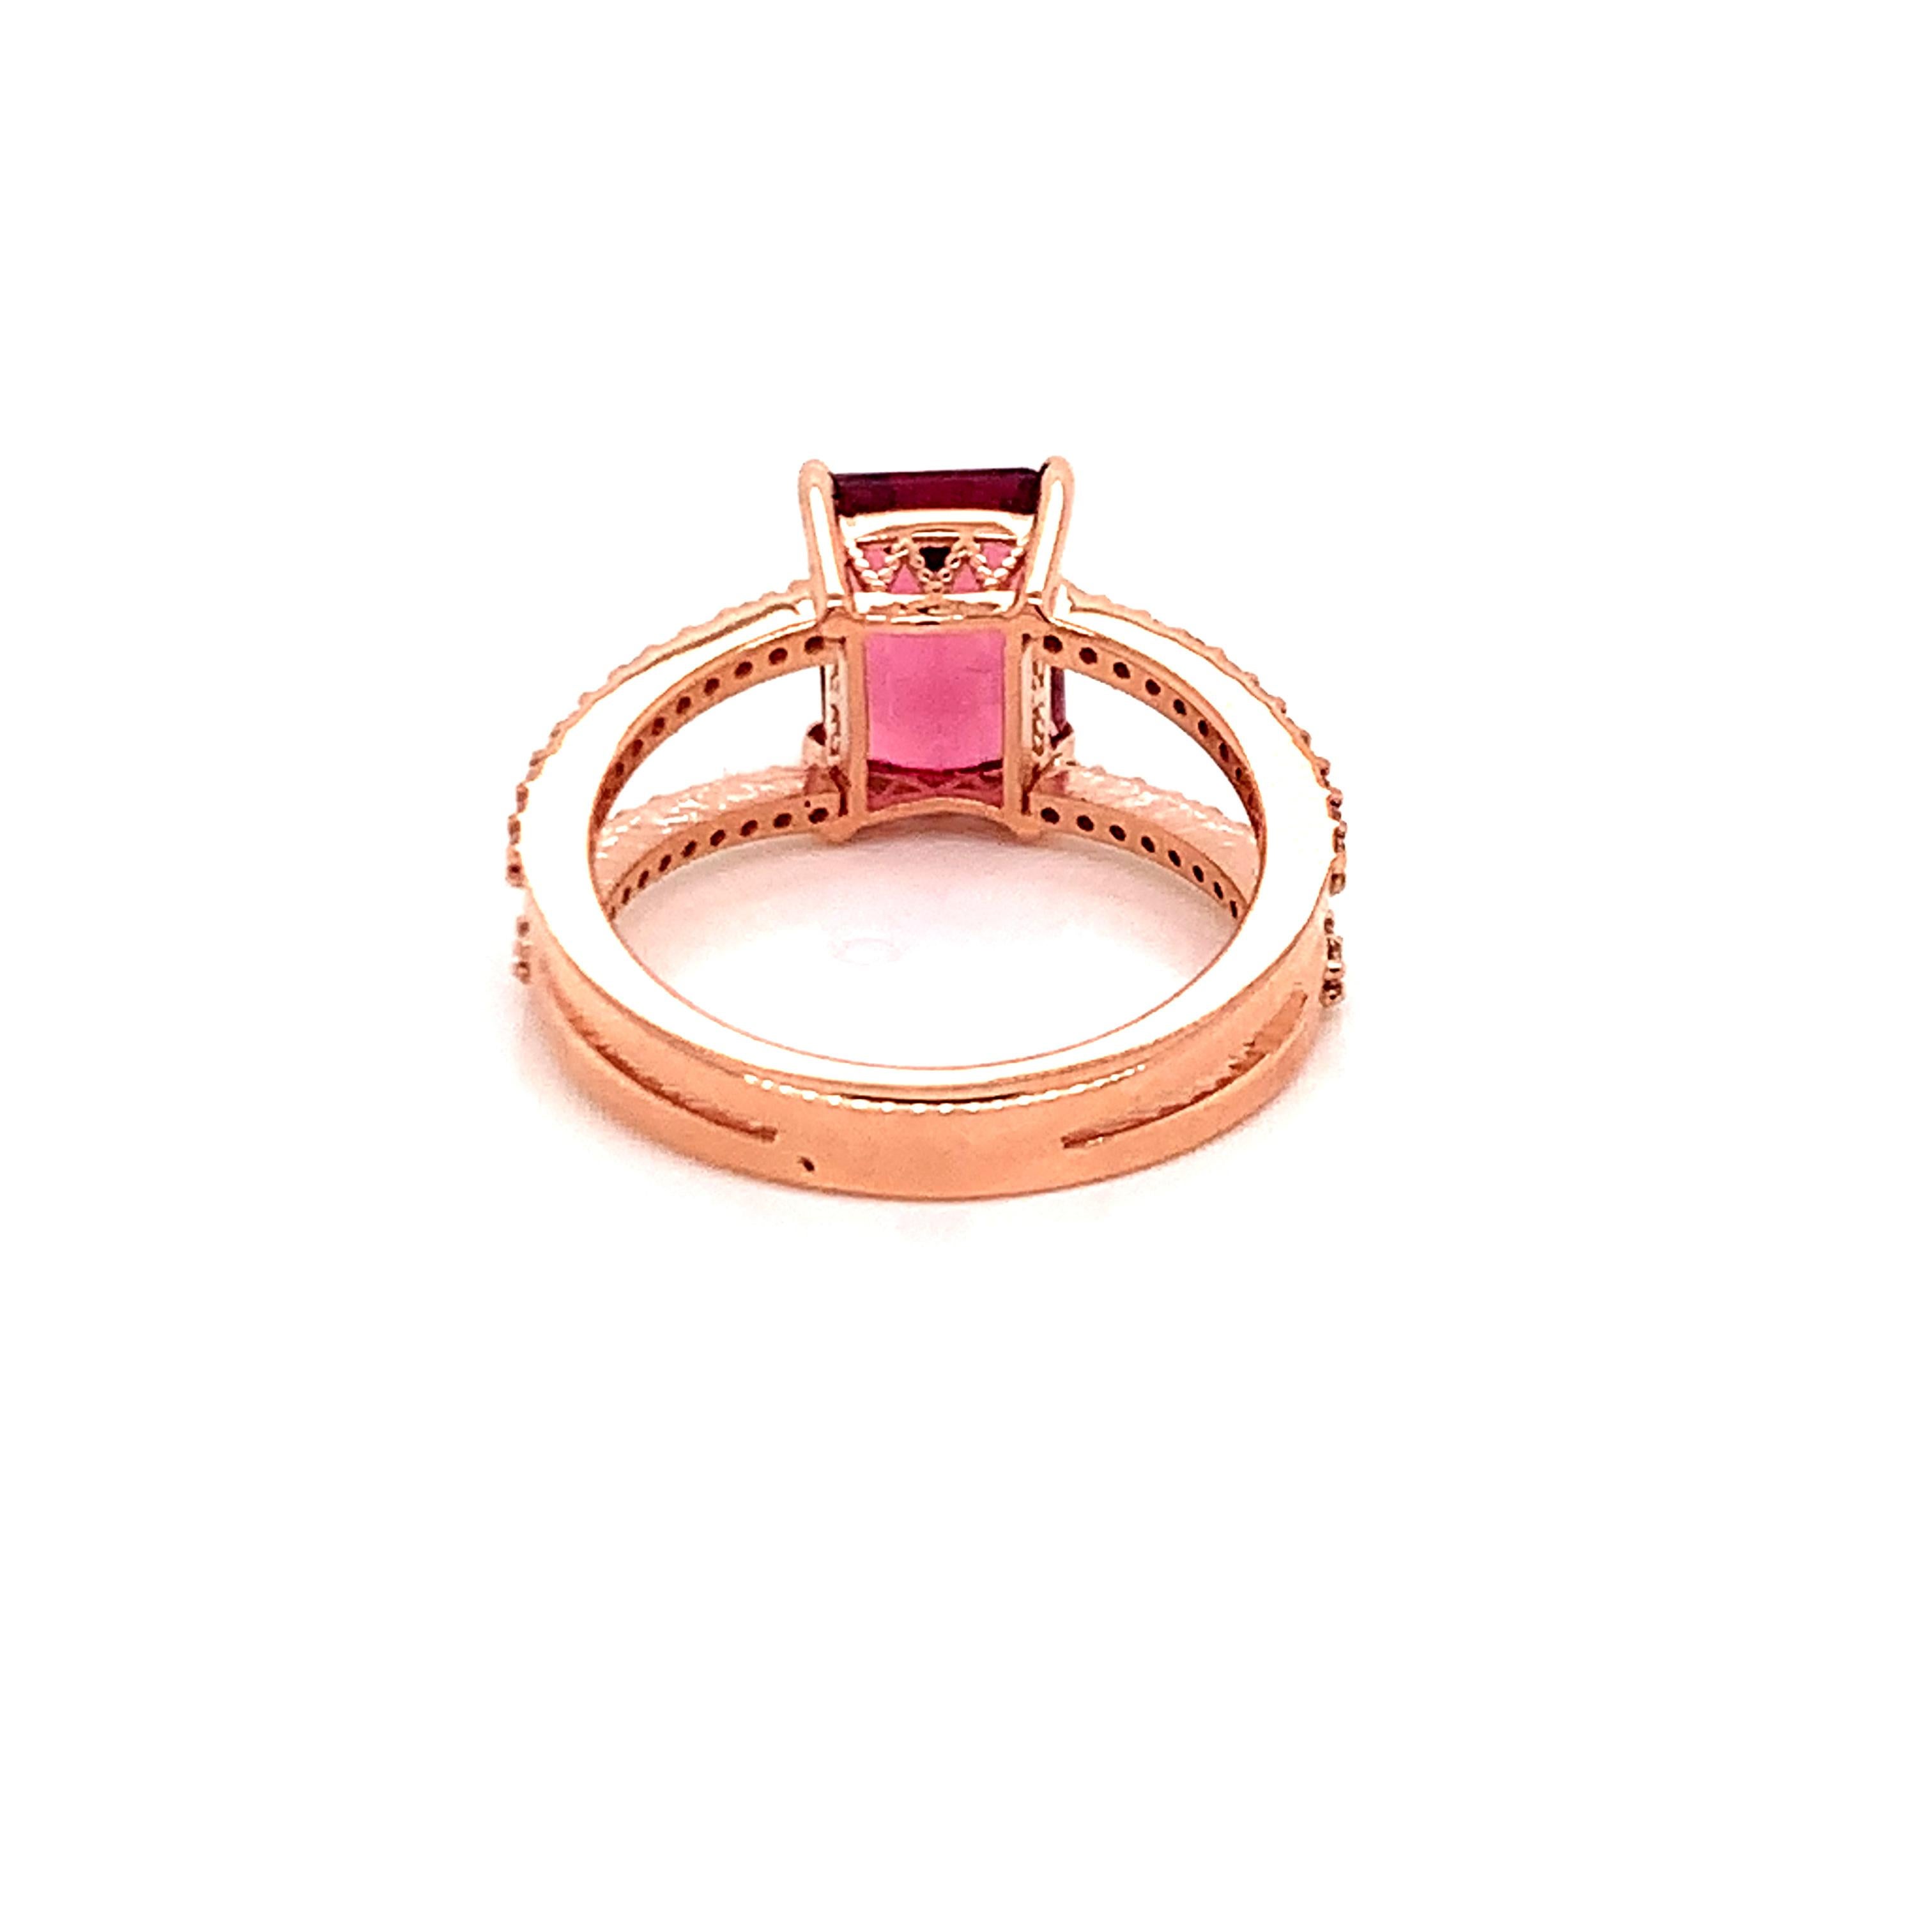 Natural Tourmaline Diamond Ring 14k Rose Gold 2.2 TCW Certified For Sale 3